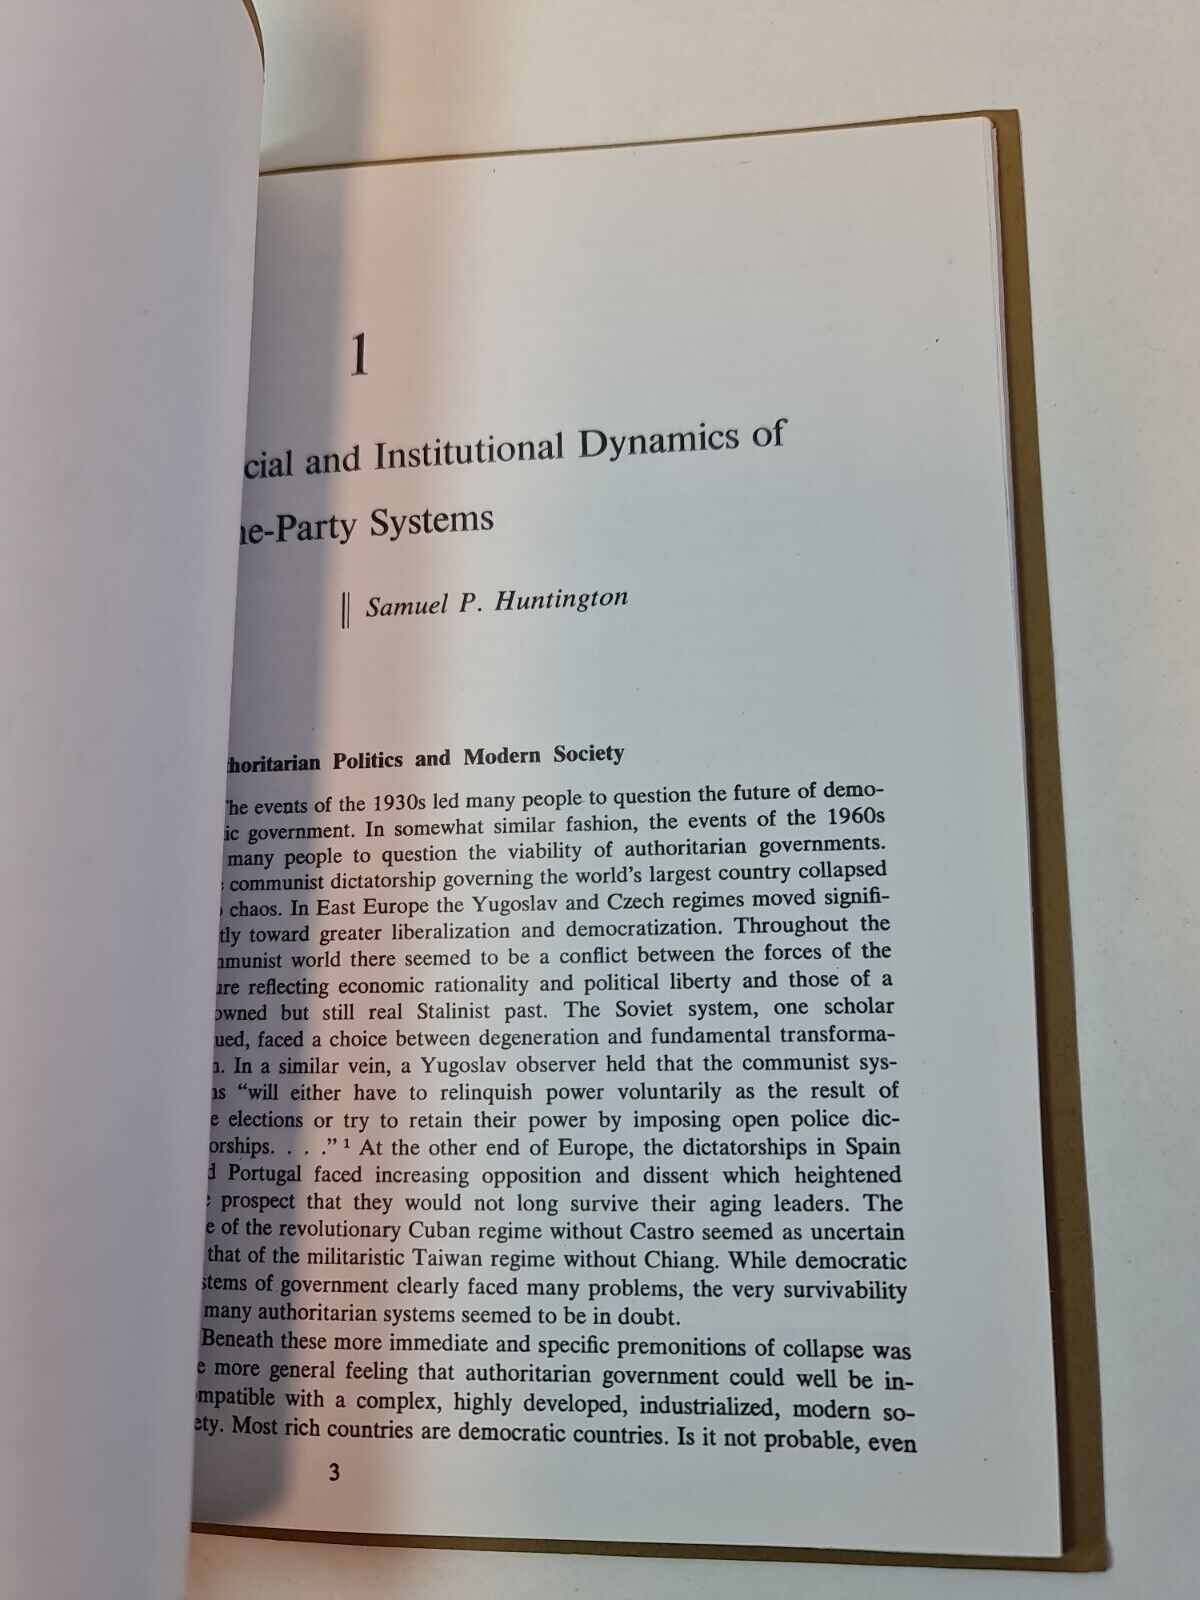 Social & Institutional Dynamics of One-Party Systems by Samuel Huntington (1970)